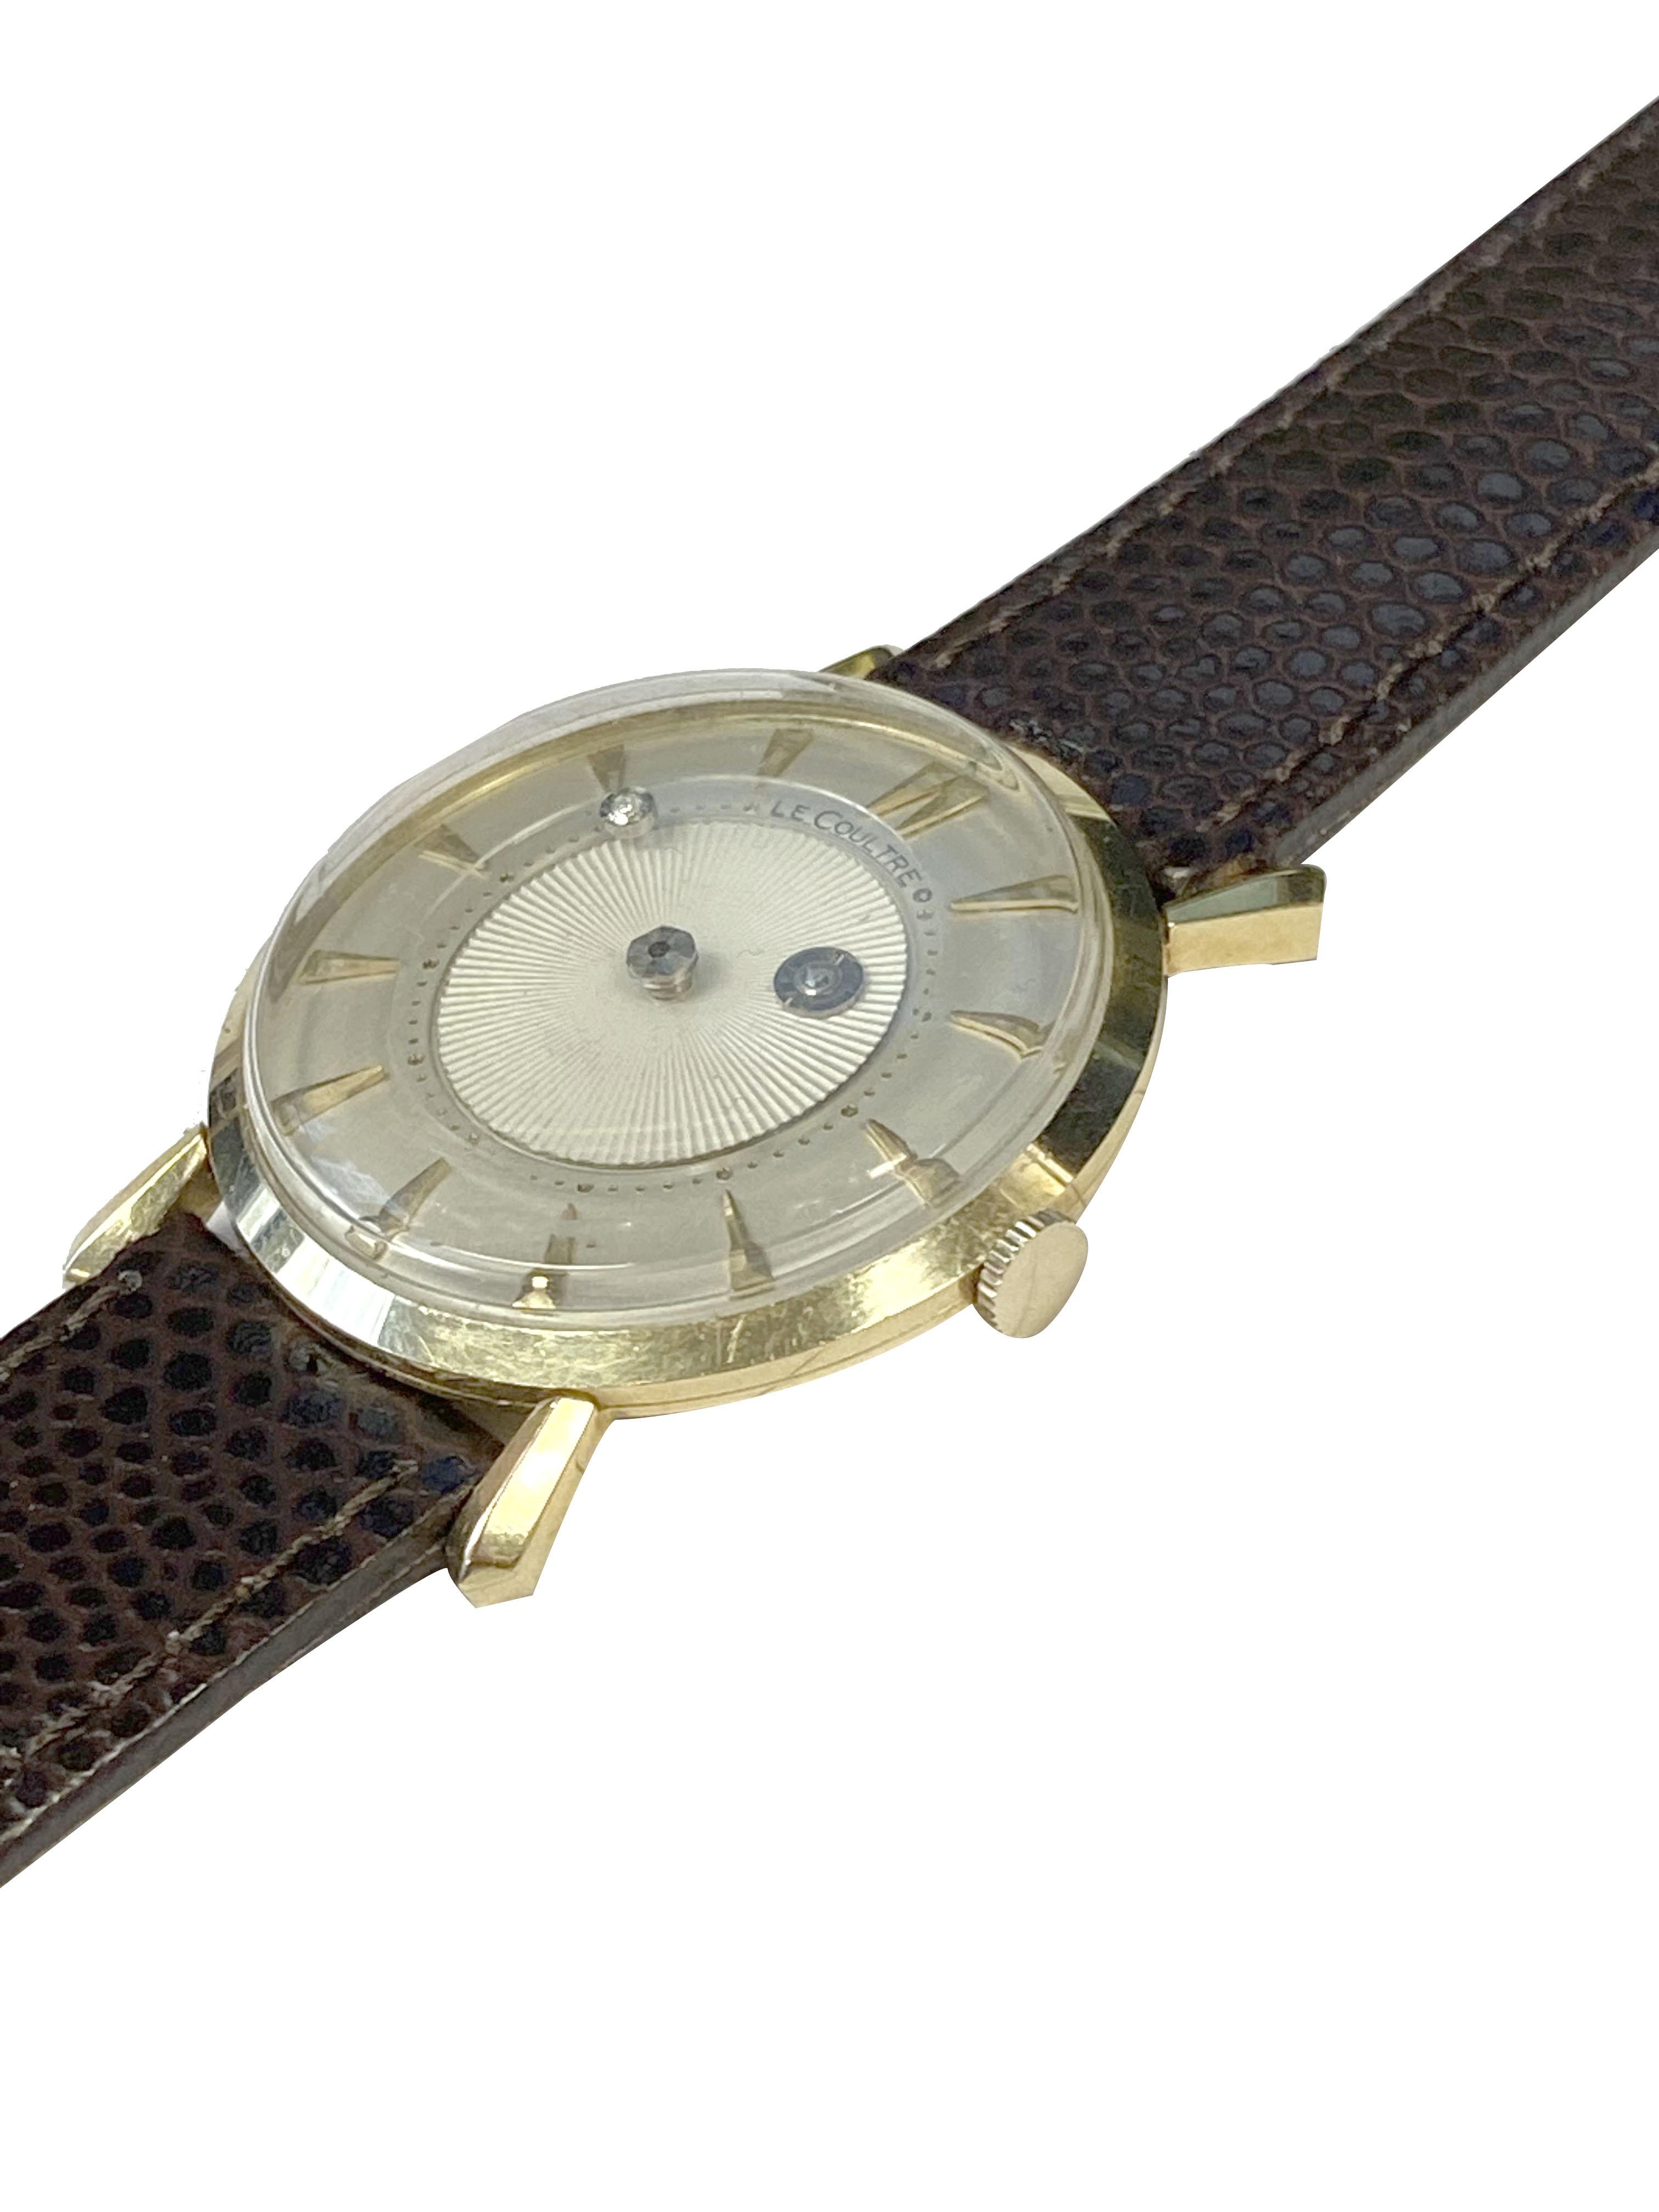 Circa 1950s LeCoultre Mystery Dial Wrist Watch, 32 M.M. 14k Yellow Gold 2 piece case with Flared Lugs, 17 Jewel Mechanical, Manual Wind movement. Excellent Original Silver Satin Dial with raised Gold markers, textured center and floating disk with